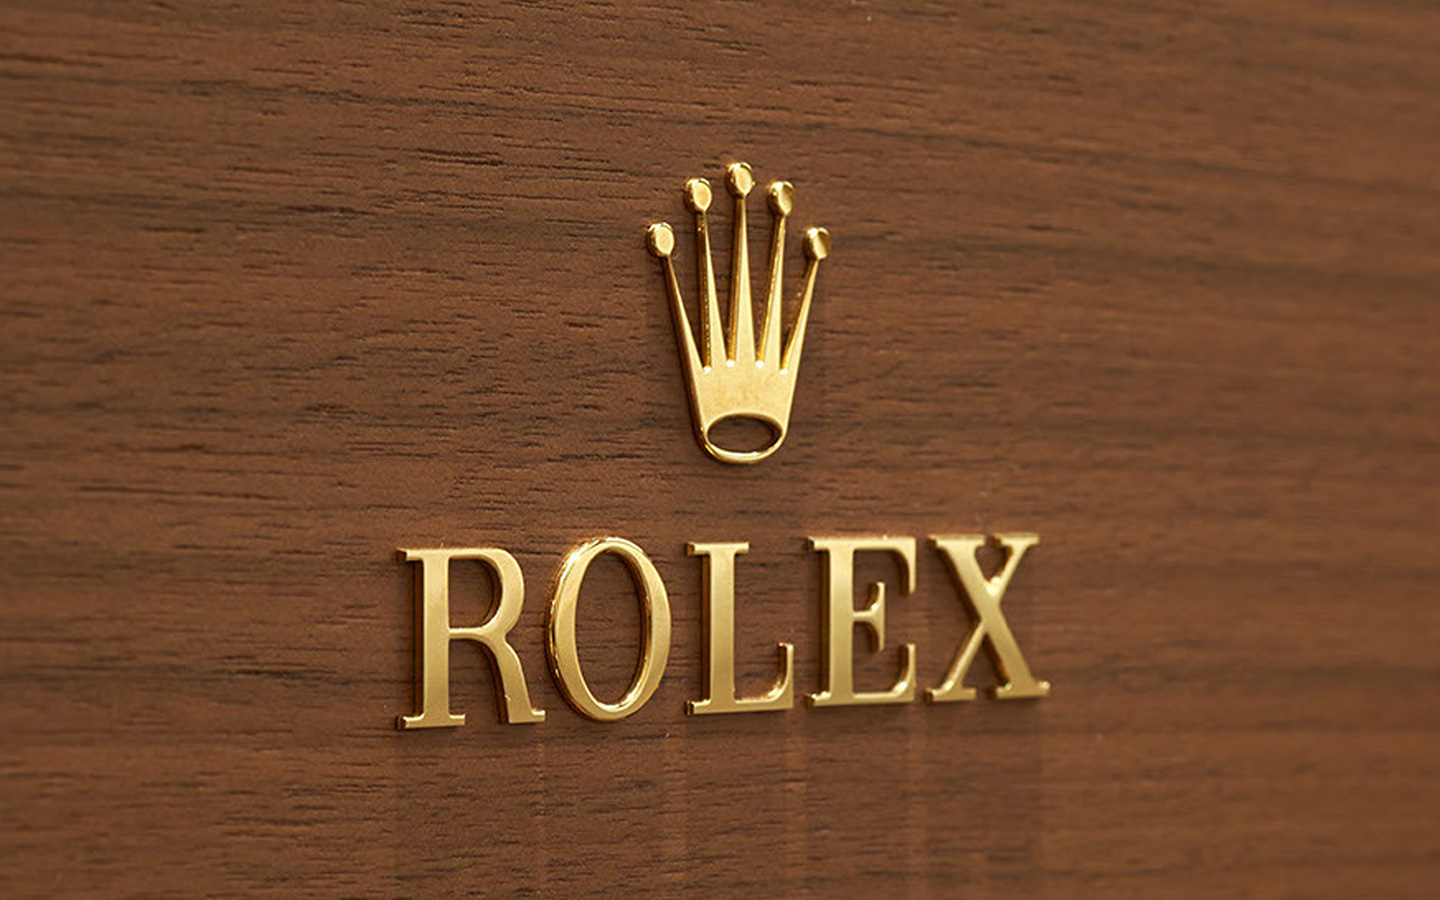 Rolex watches at Thomas Markle Jewelers in Houston, TX